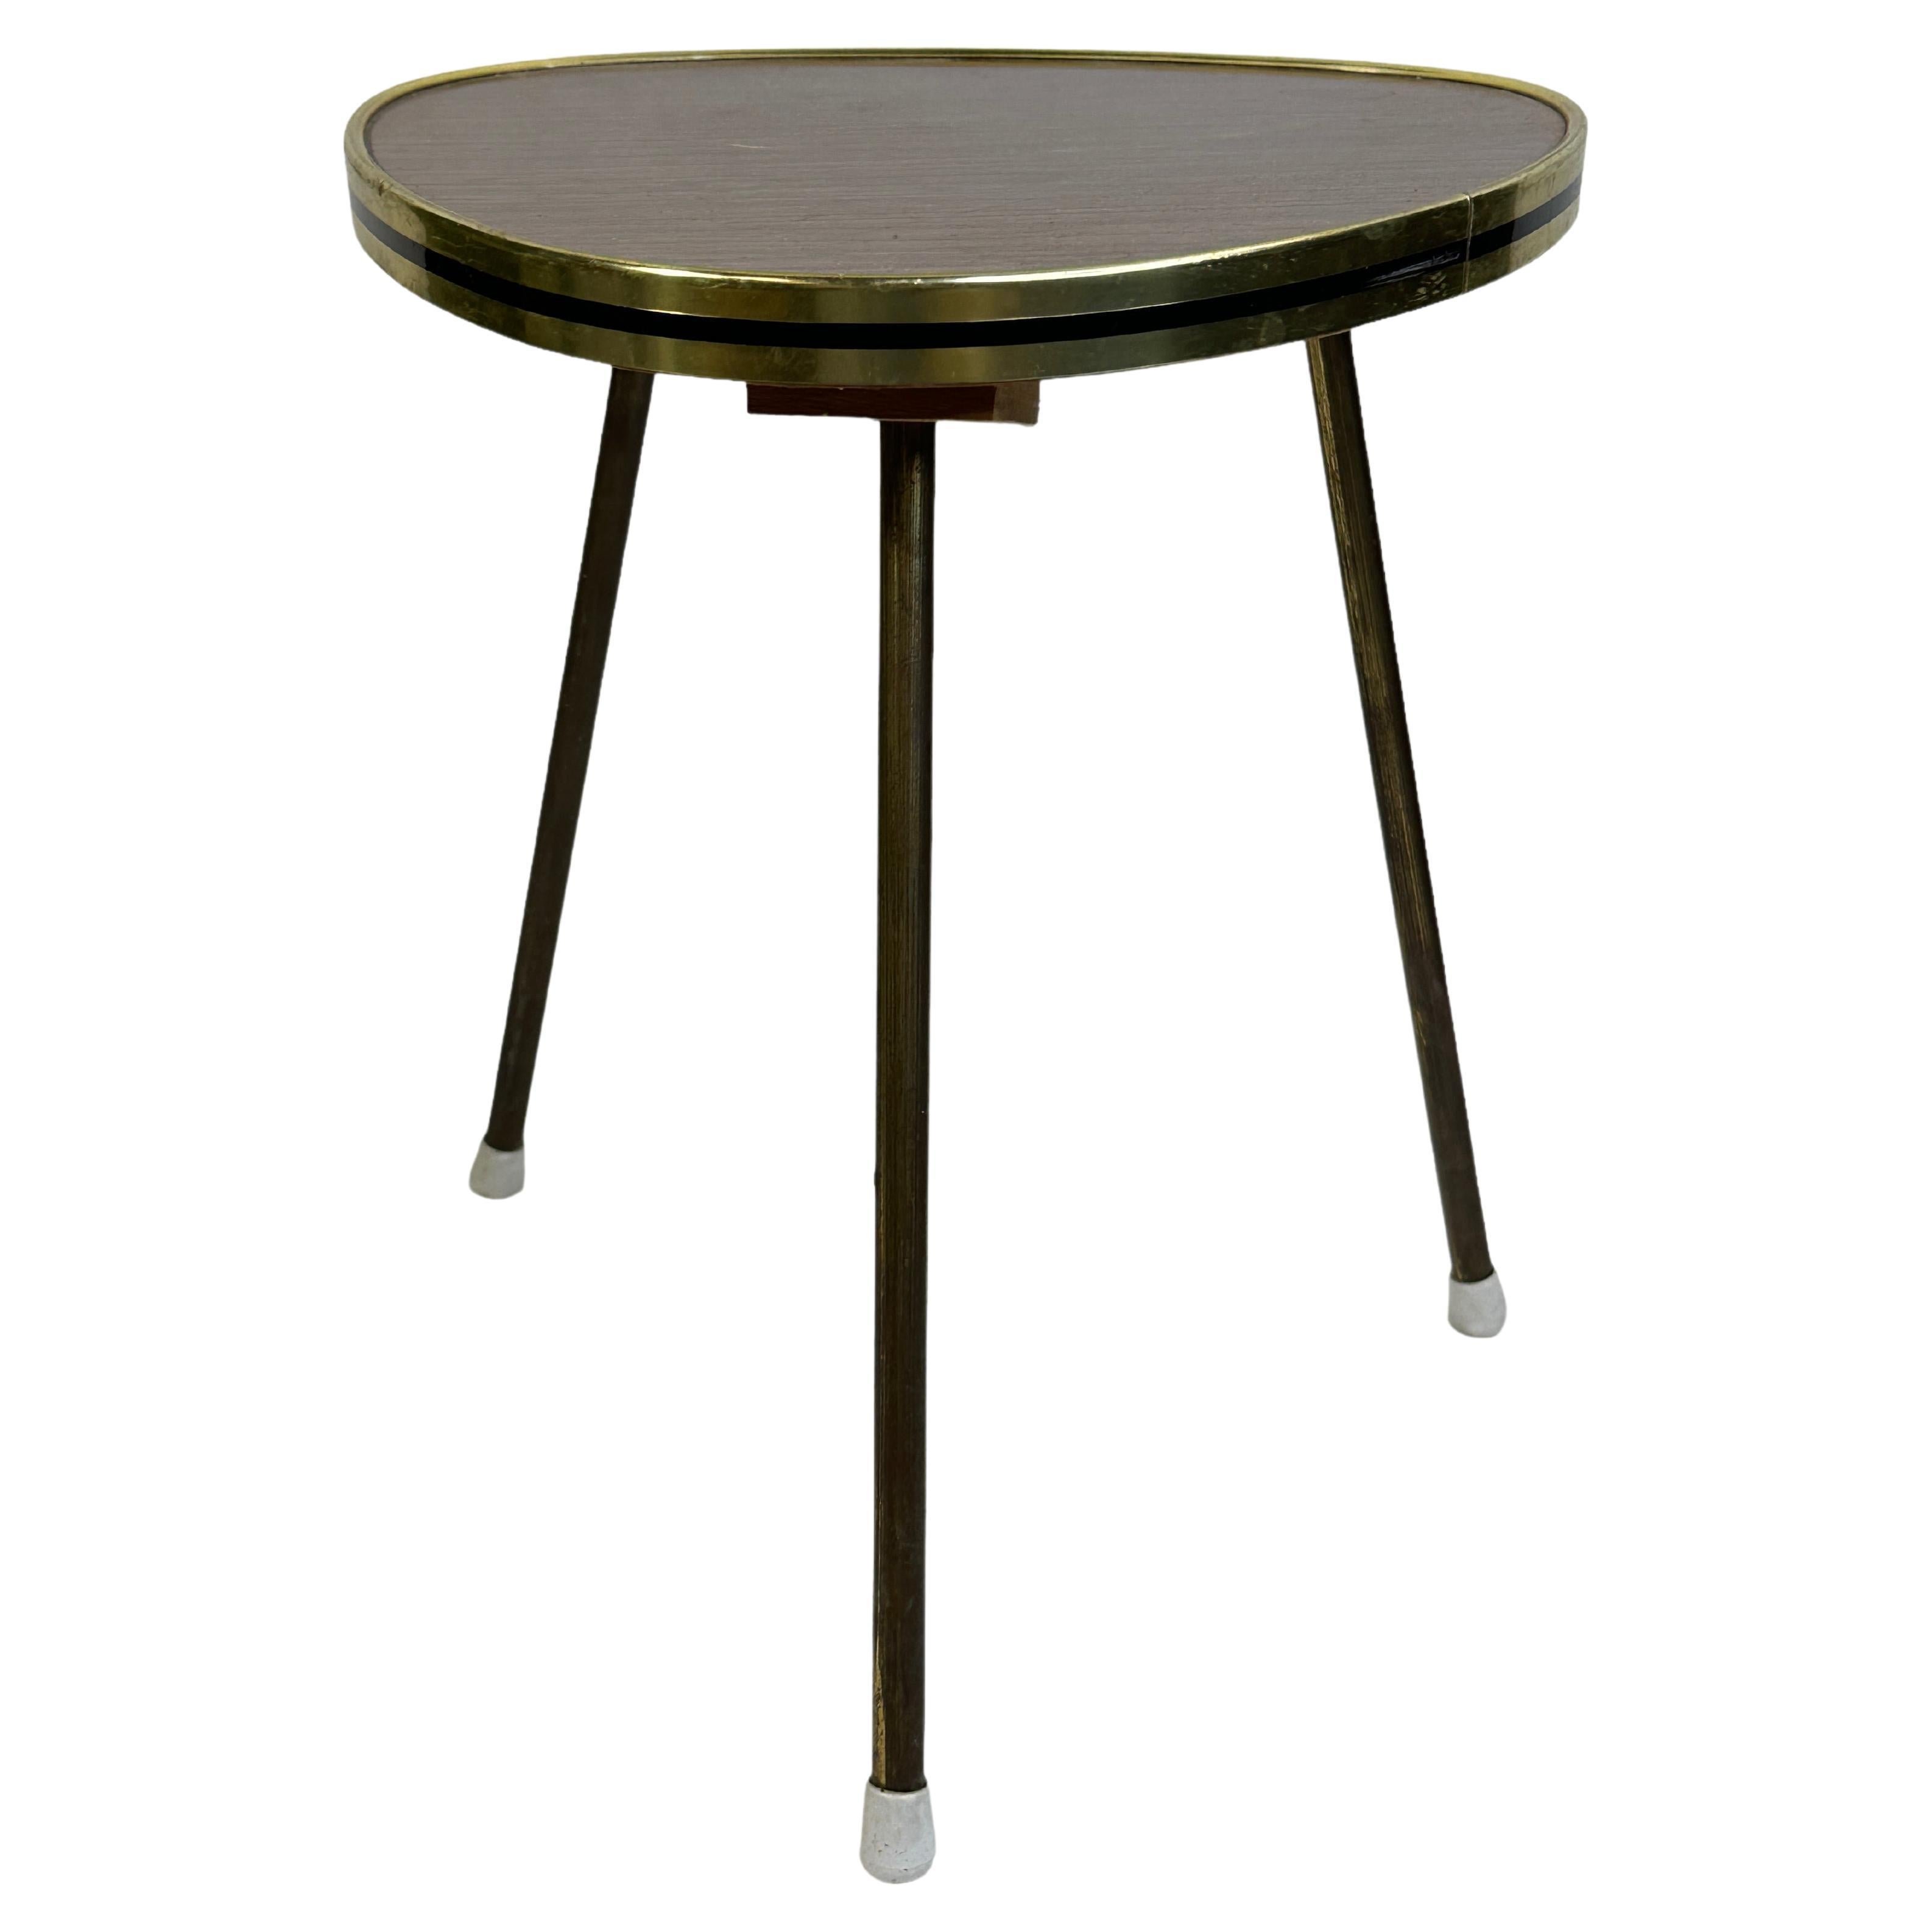 Mid-20th century modern garden stool, flower pot seat or side table. Made of Plywood with brass legs. Nice addition to your home, patio or garden. Also great as a drinks stand in your pool area. Found at an estate sale in Vienna, Austria. 
    